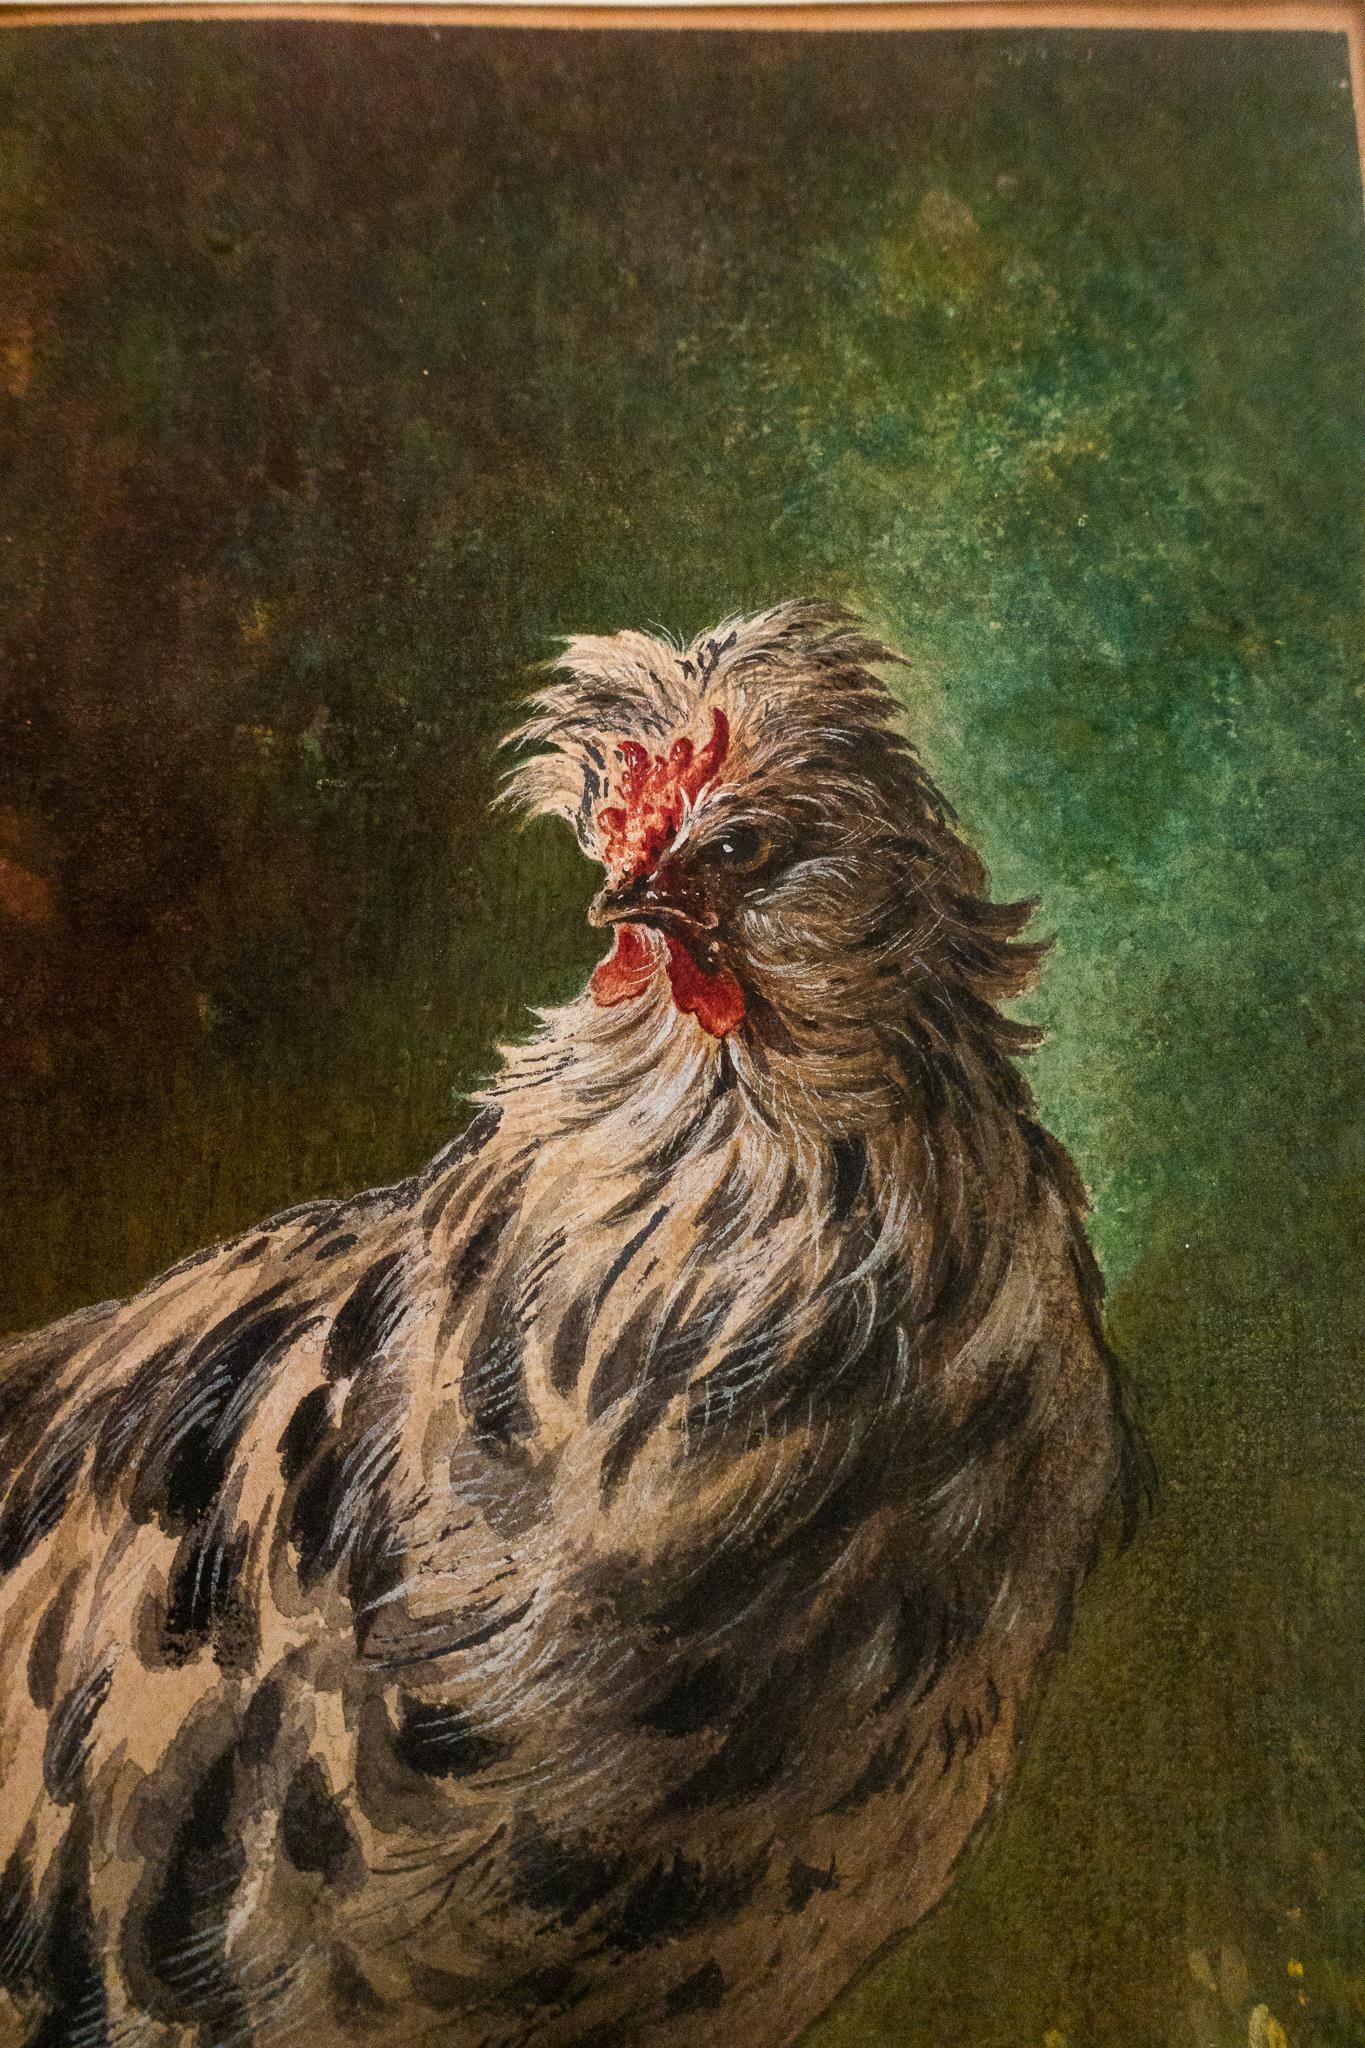 Watercolor depiction of a chicken hen by Francois-Joseph DeHaspe. Very detailed and beautifully executed.